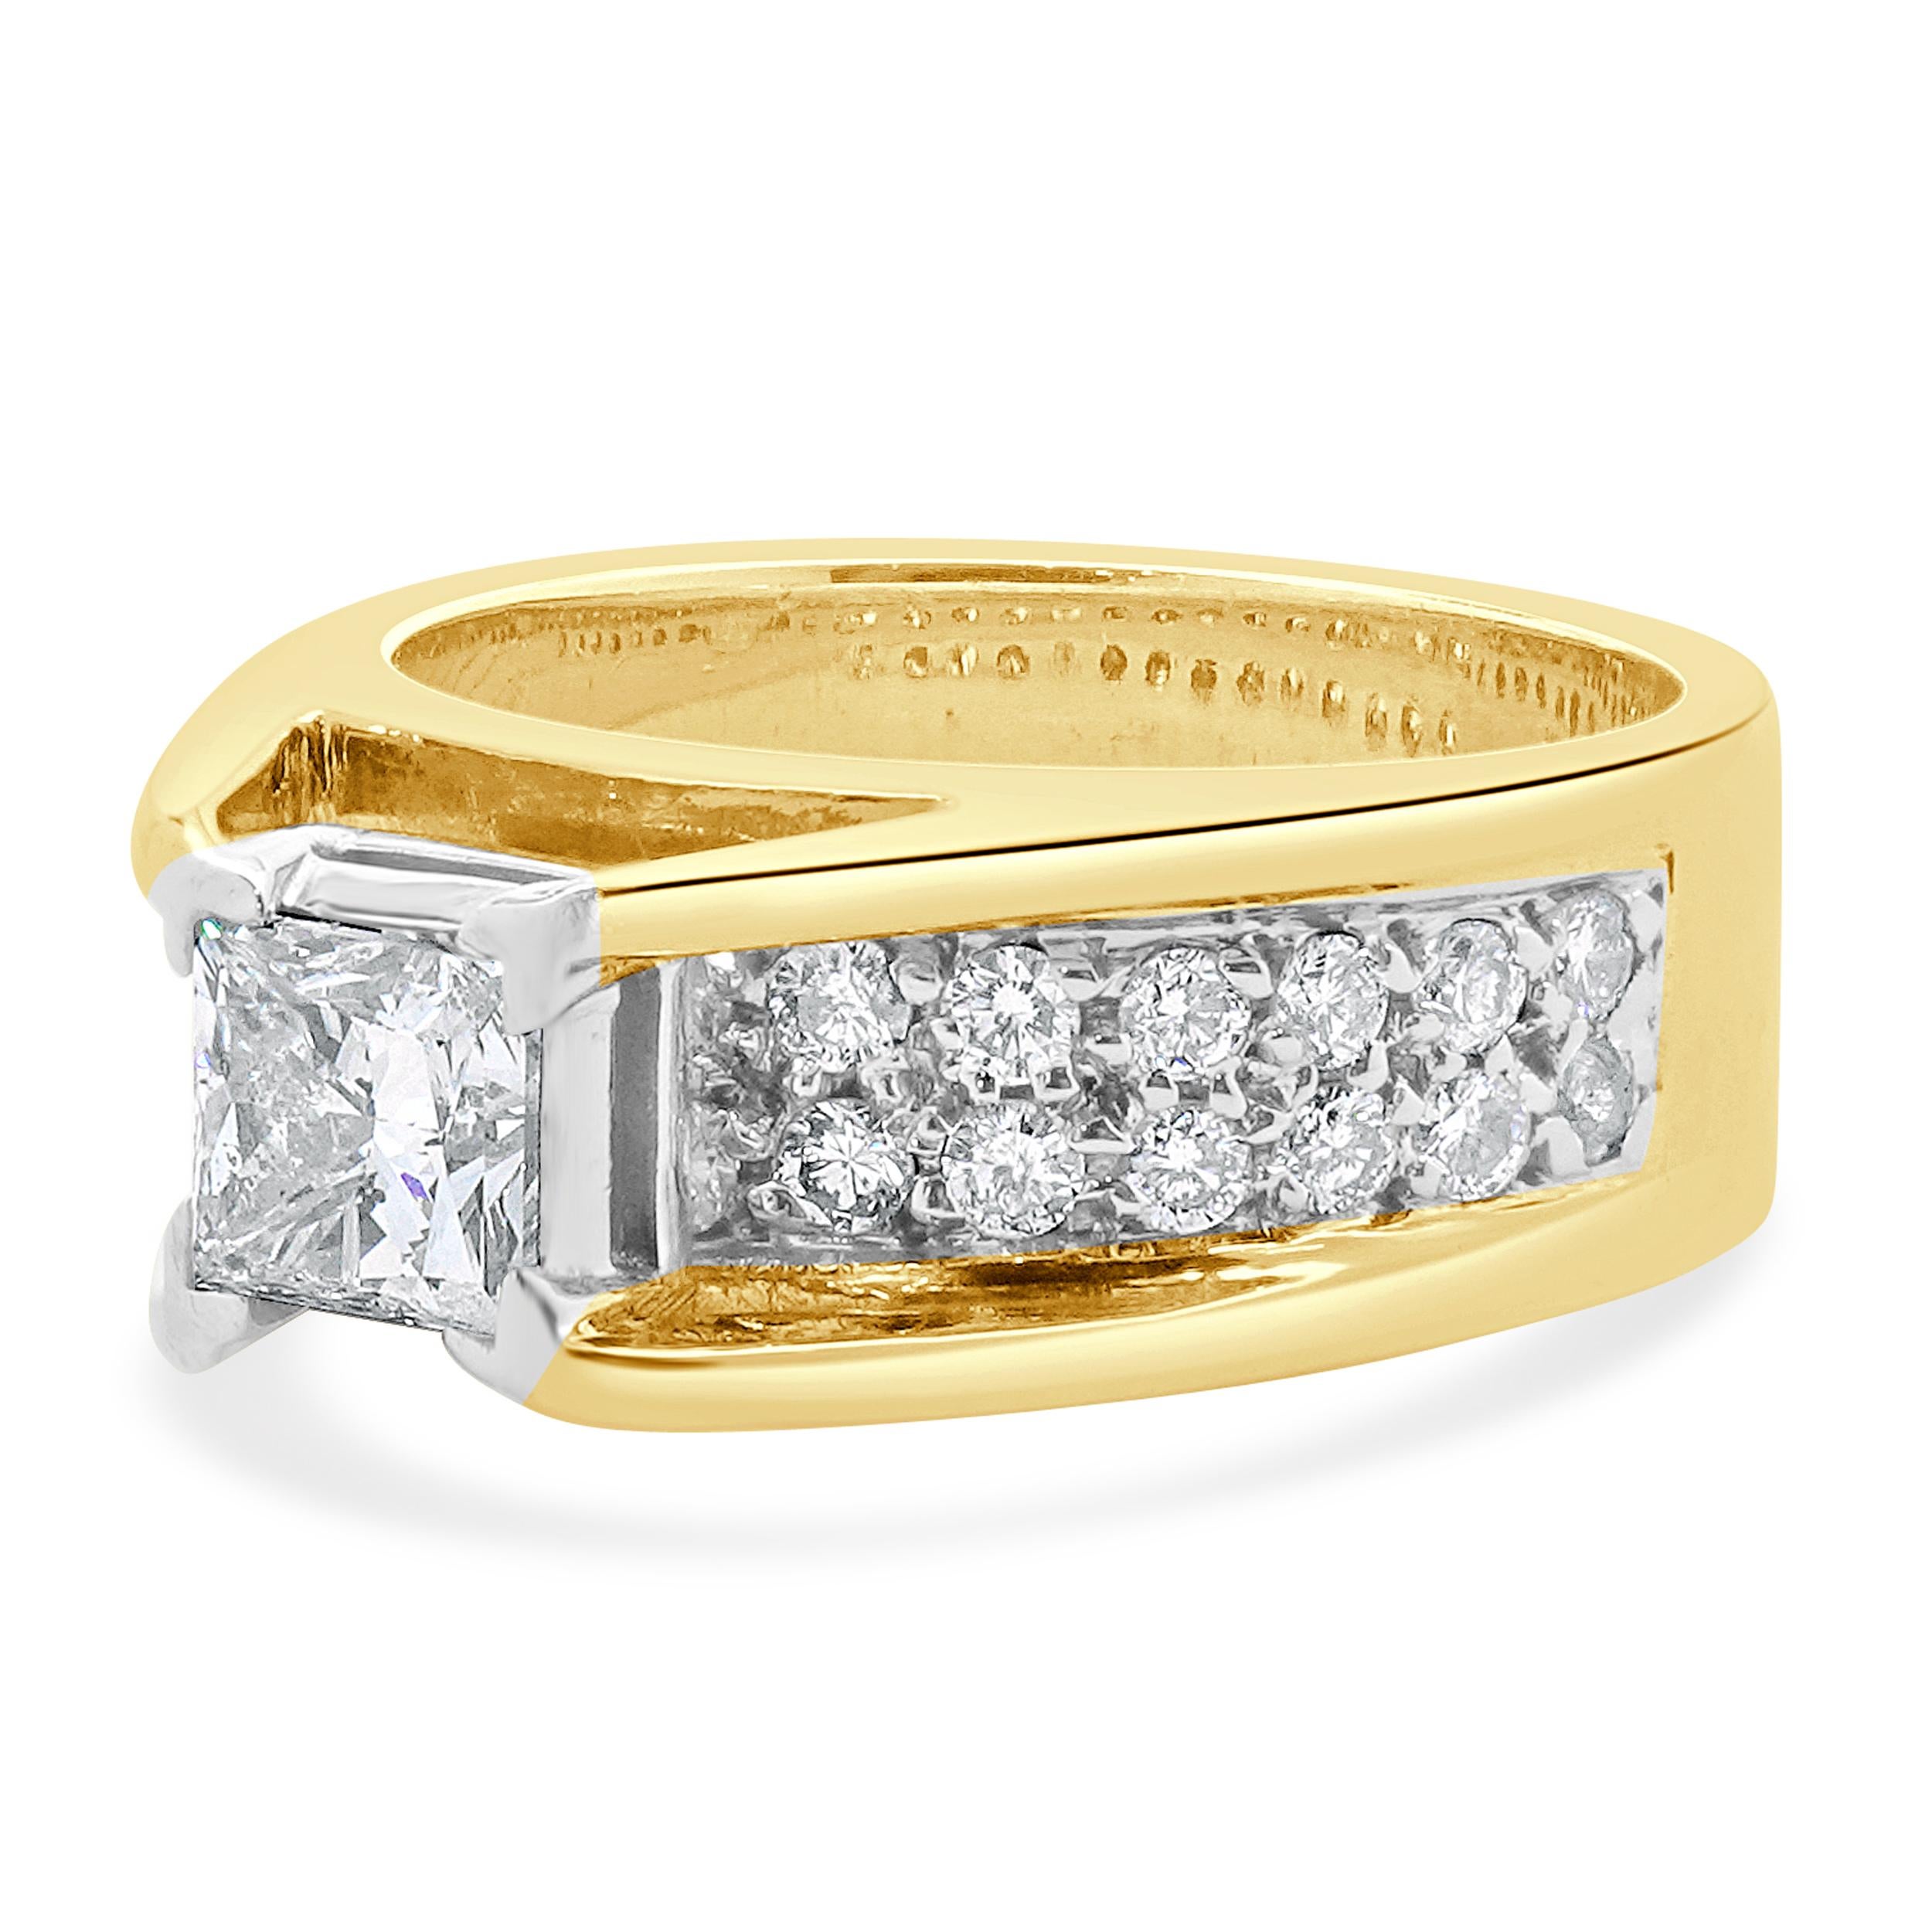 Designer: custom
Material: 14K yellow & white gold
Diamond:  1 princess cut = 0.65ct
Color: H
Clarity: I2
Diamond:  28 round brilliant cut = 0.42cttw
Color: H 
Clarity: SI2-I1
Dimensions: ring top measures 7.6mm wide
Ring Size: 5 (complimentary